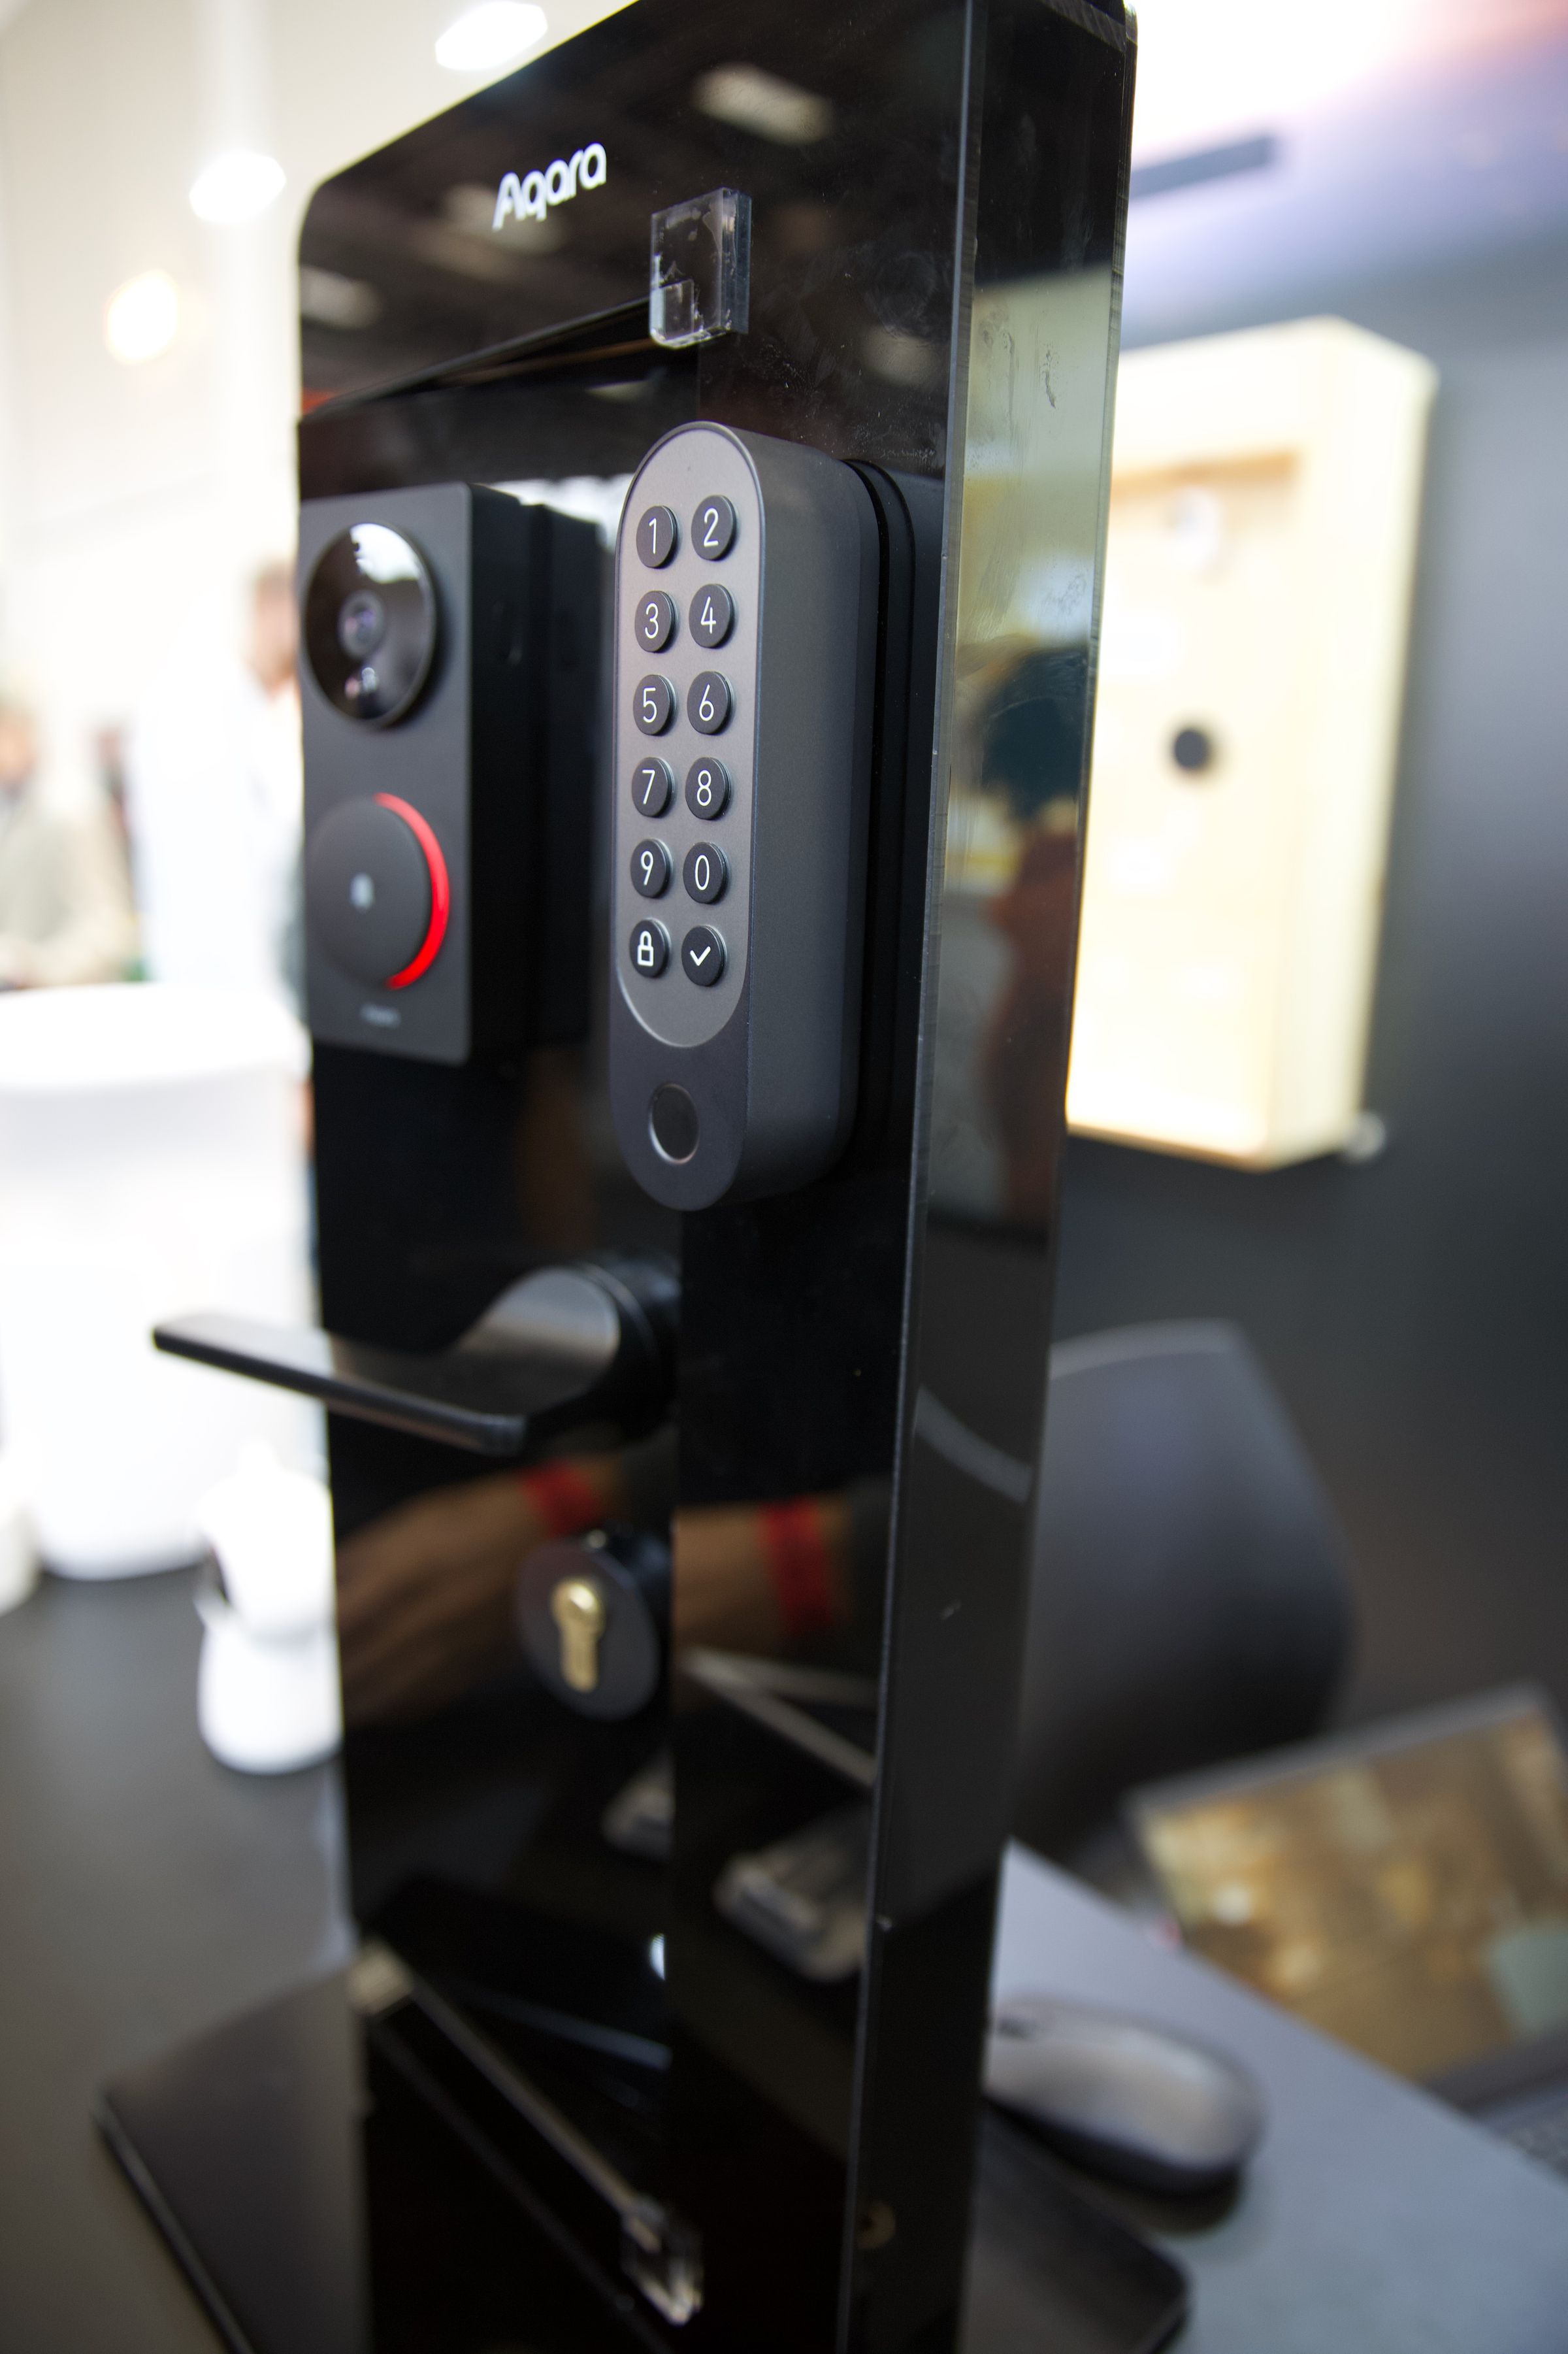 The separate Bluetooth keypad (pictured next to Aqara’s video doorbell) connects to the lock via Bluetooth.